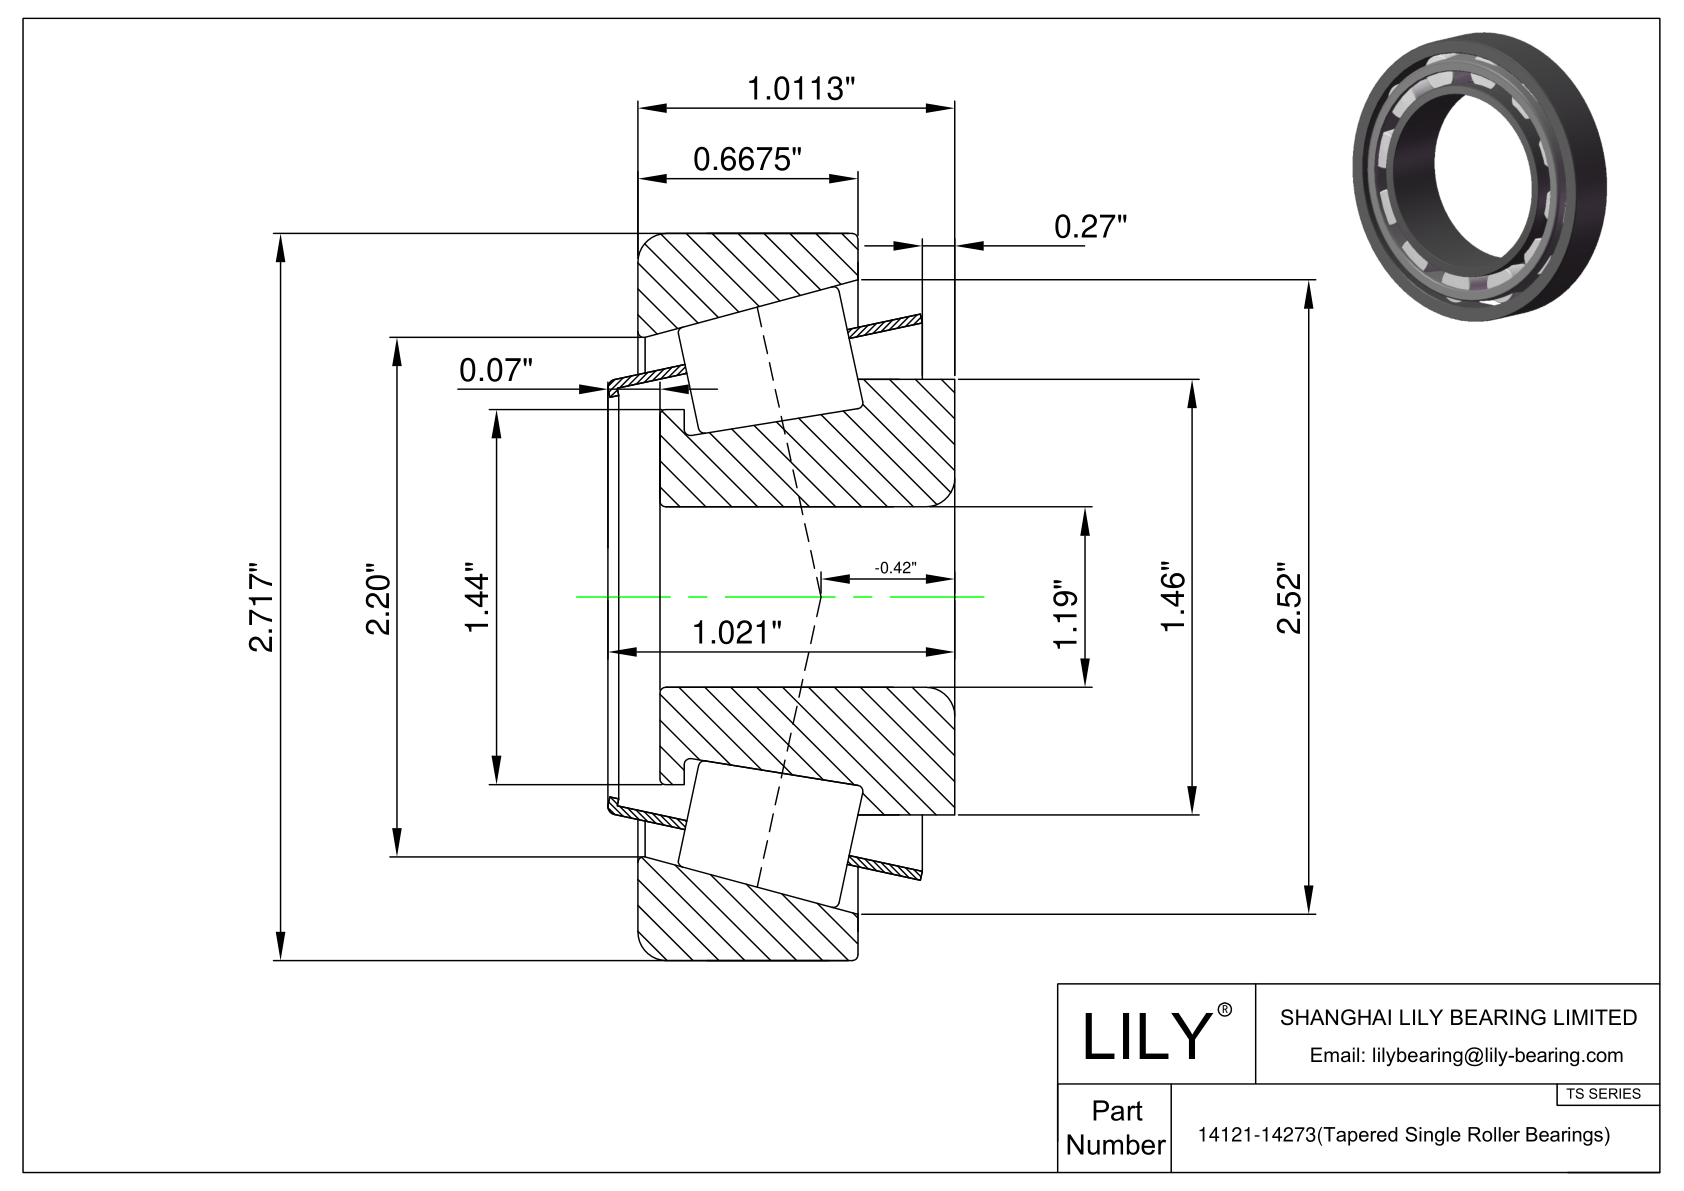 14121-14273 TS (Tapered Single Roller Bearings) (Imperial) cad drawing